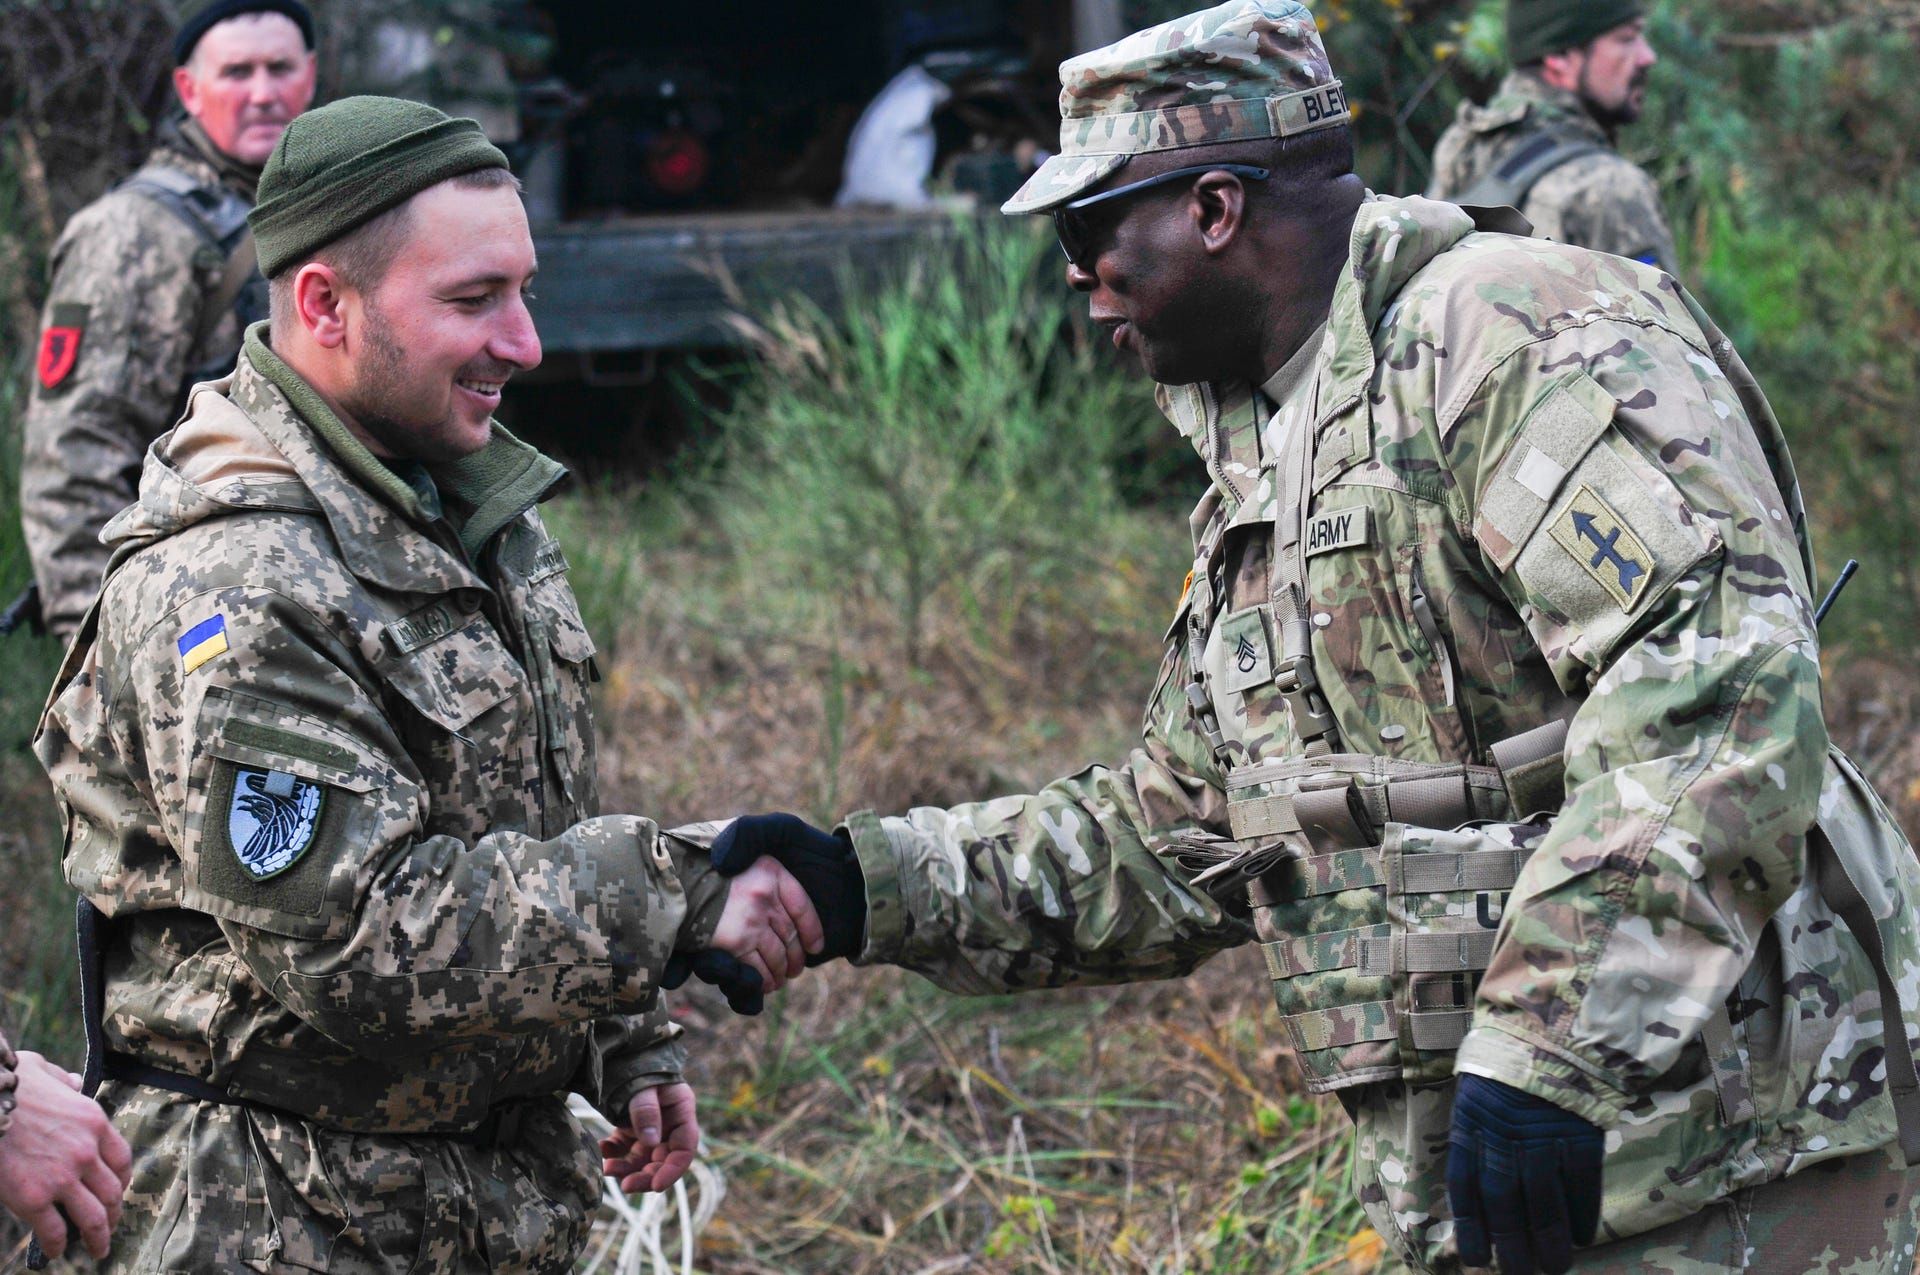 Staff Sgt. Michael Blevins, an adviser with Task Force Juvigny, greets his Armed Forces Ukraine counterparts during battalion training at the Combat Training Center–Yavoriv, Ukraine. Image by Cpl. Jared Saathoff / Wisconsin National Guard Public Affairs. Ukraine, 2020.